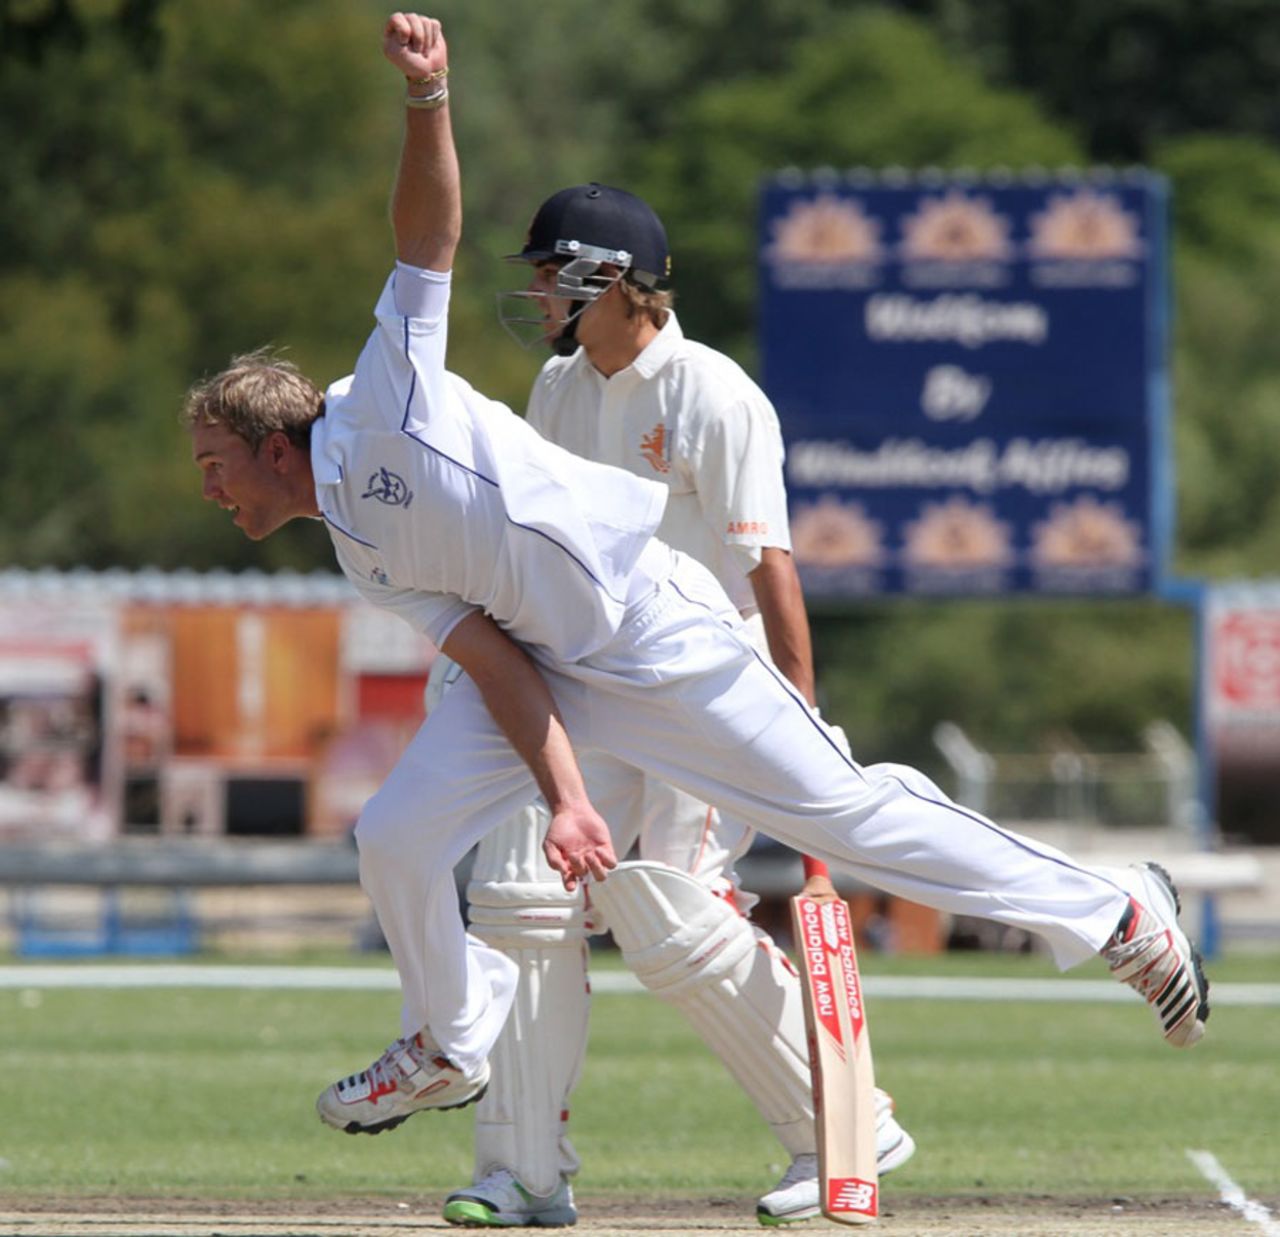 Christi Viljoen completes his bowling action, Namibia v Netherlands, ICC Intercontinental Cup 2011-13, 2nd day, Windhoek, April 12, 2013